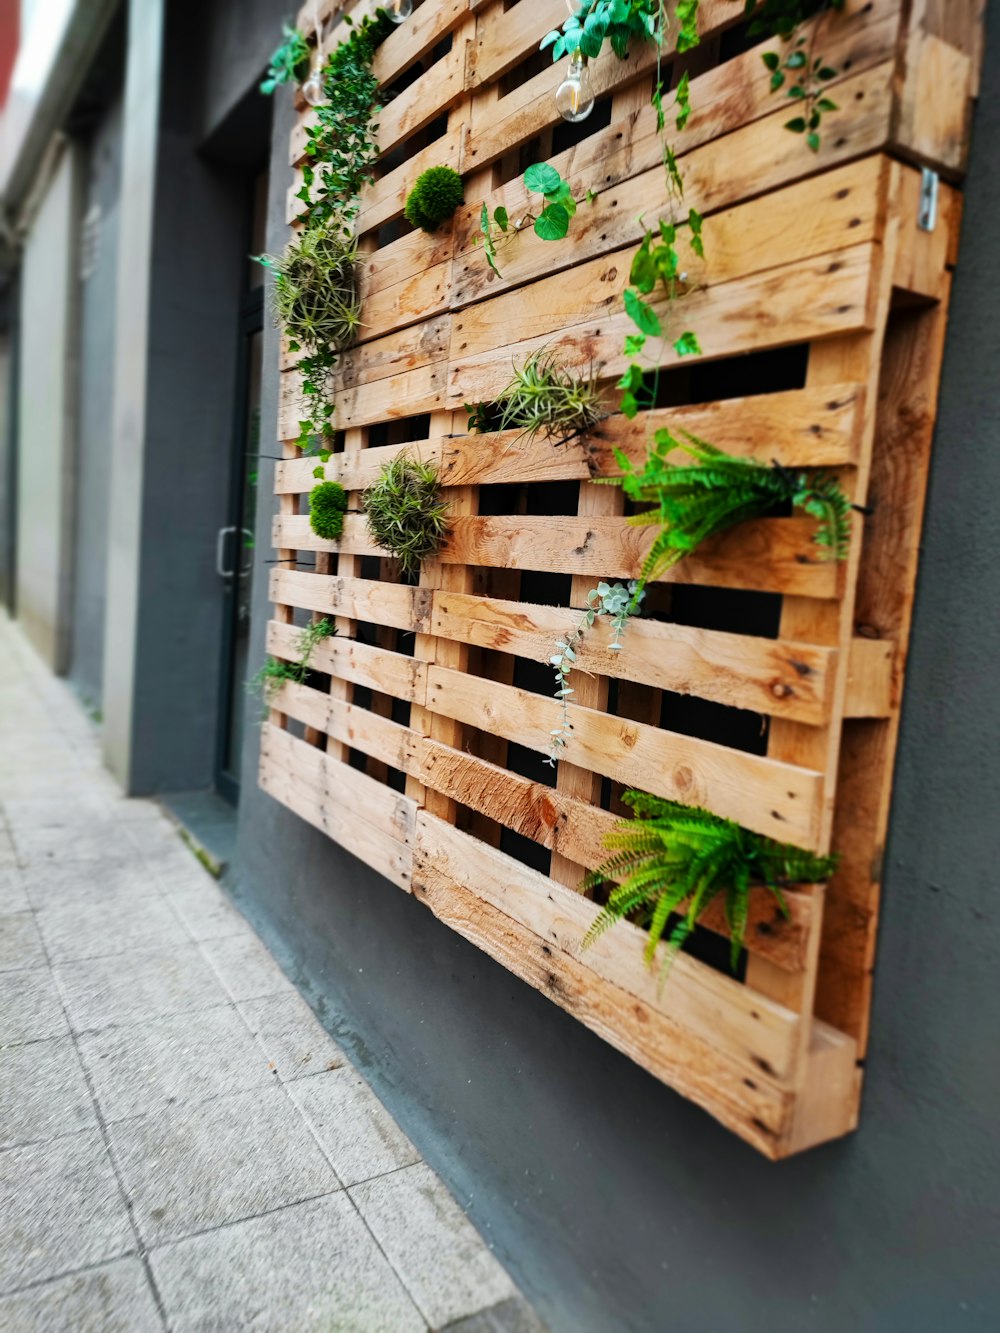 a wooden pallet with plants growing on it